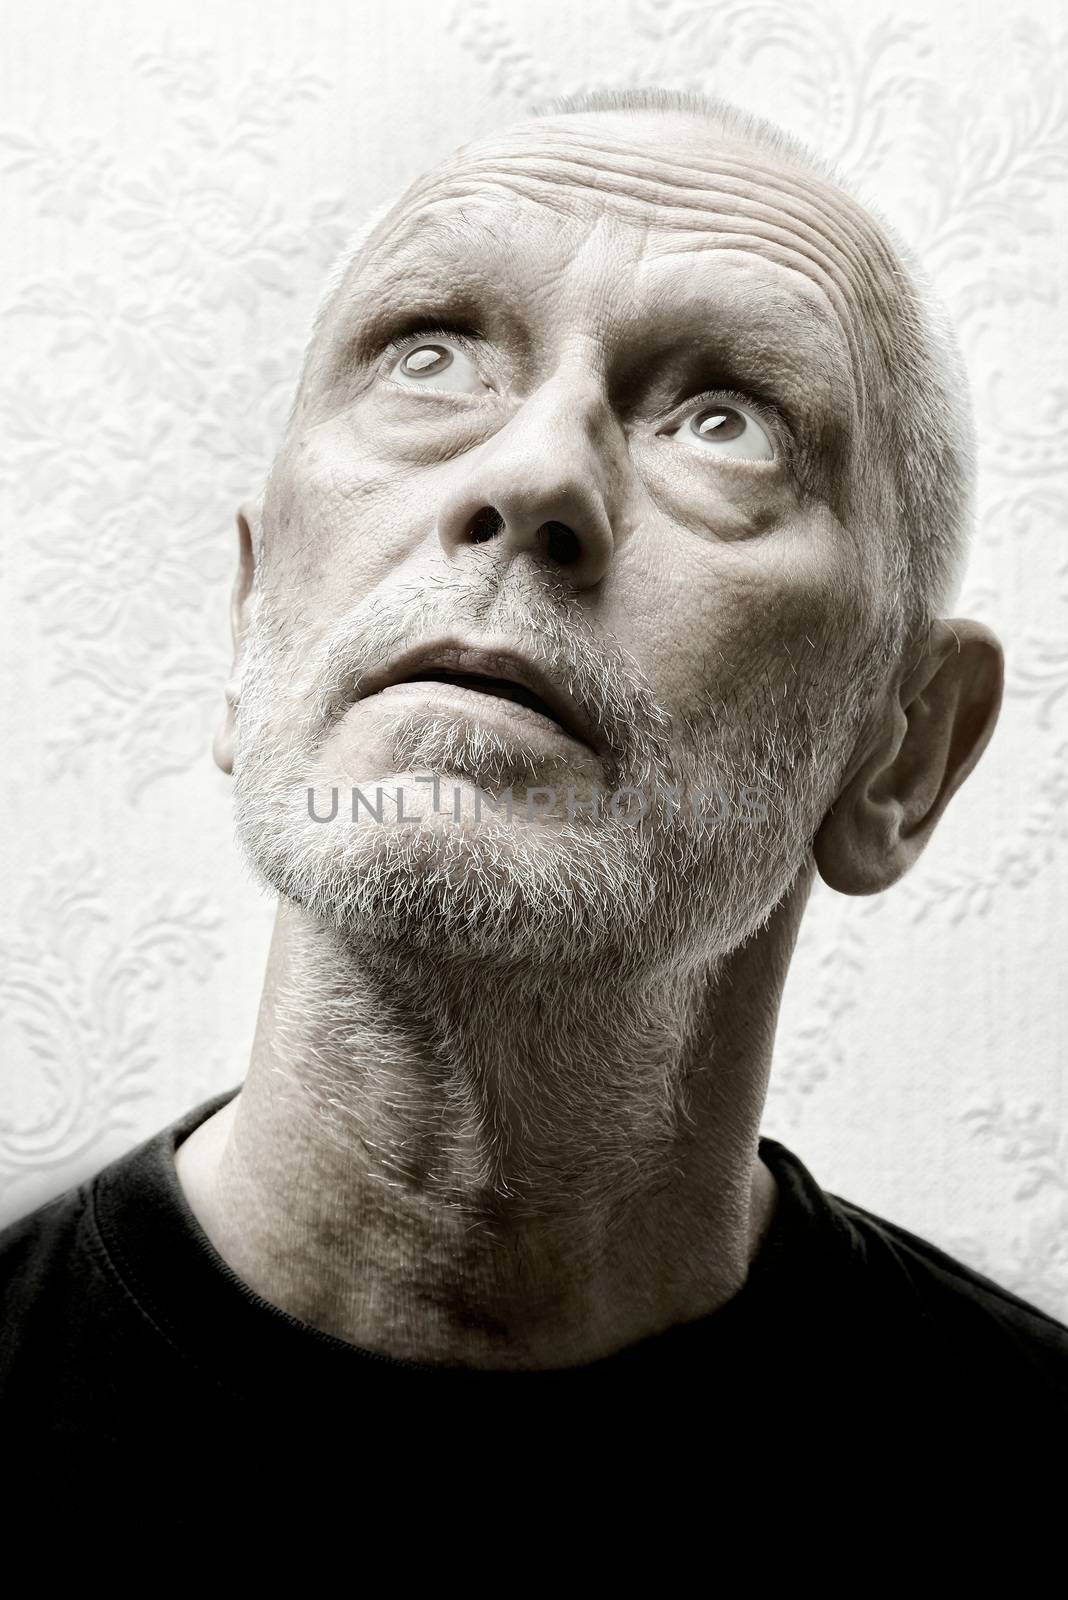 Black and white portrait of an agape and inquisitive caucasian adult man with eyes looking up